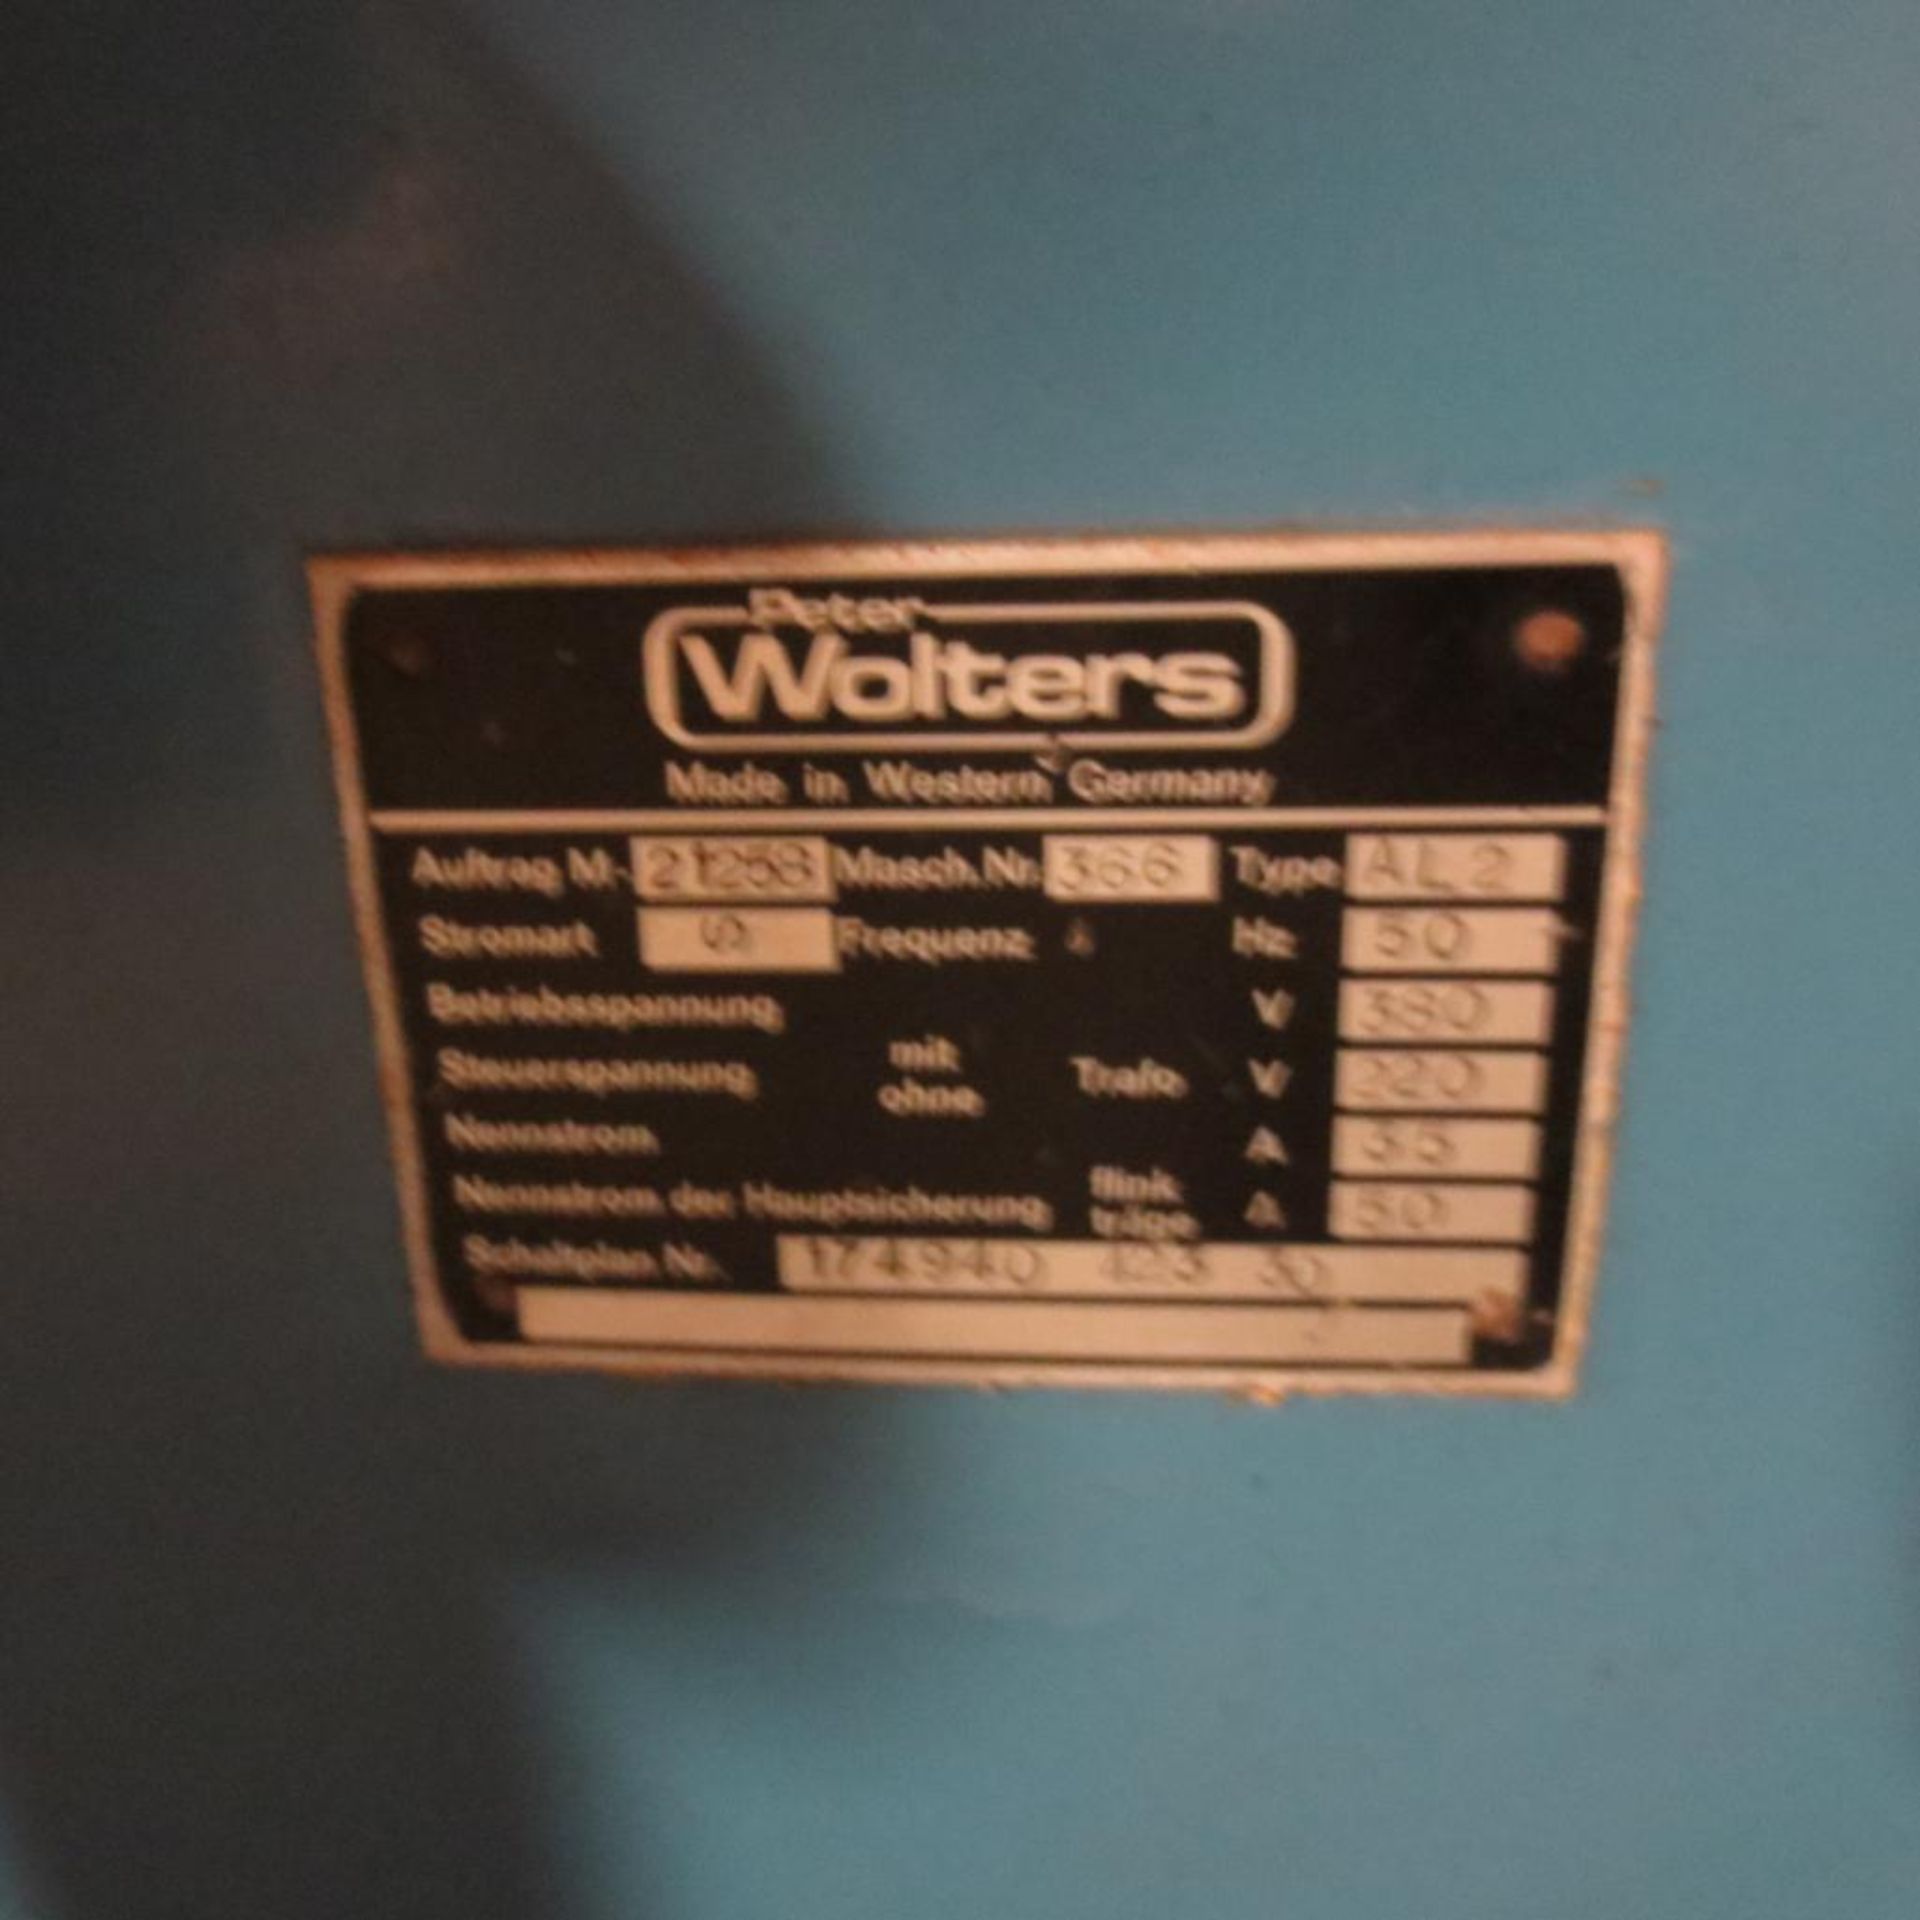 Peter Wolters 30" Type AL2 Rotary Lapping Machine S/N: 366, 3-KW Spindle Drive. Loading Fee is $550. - Image 2 of 6